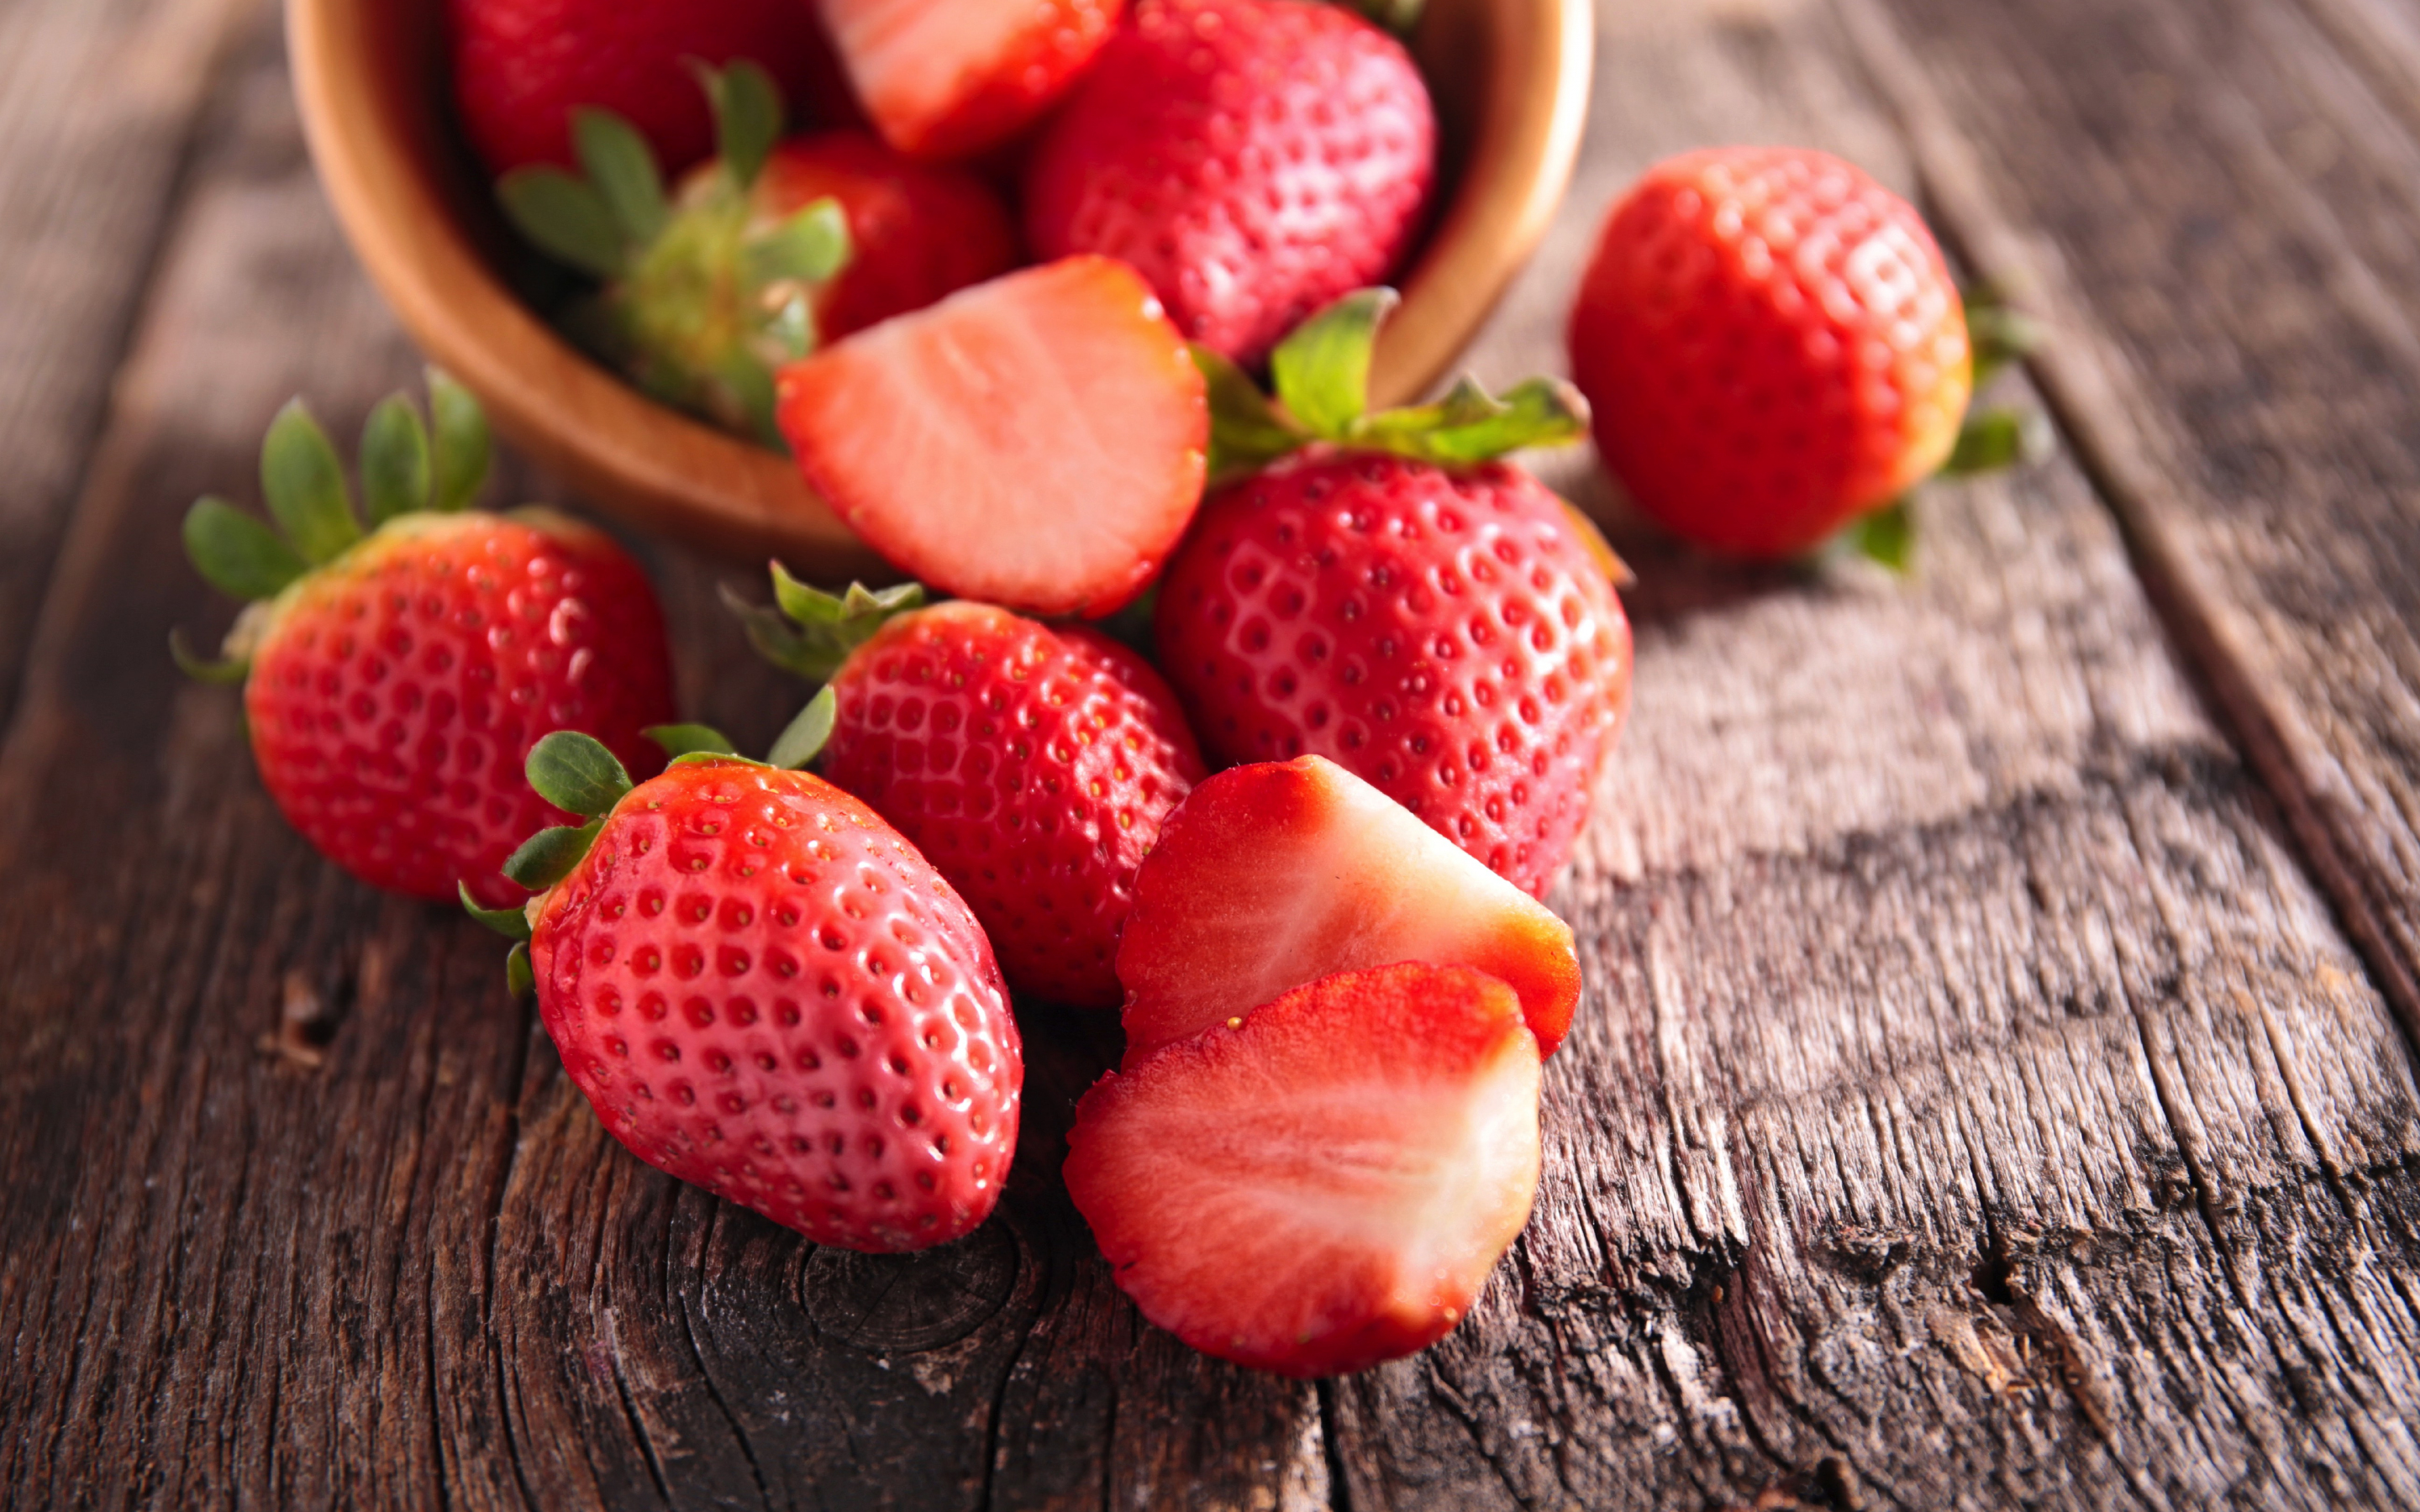 Strawberry, fruits, berries, basket, slices, 2880x1800 wallpaper